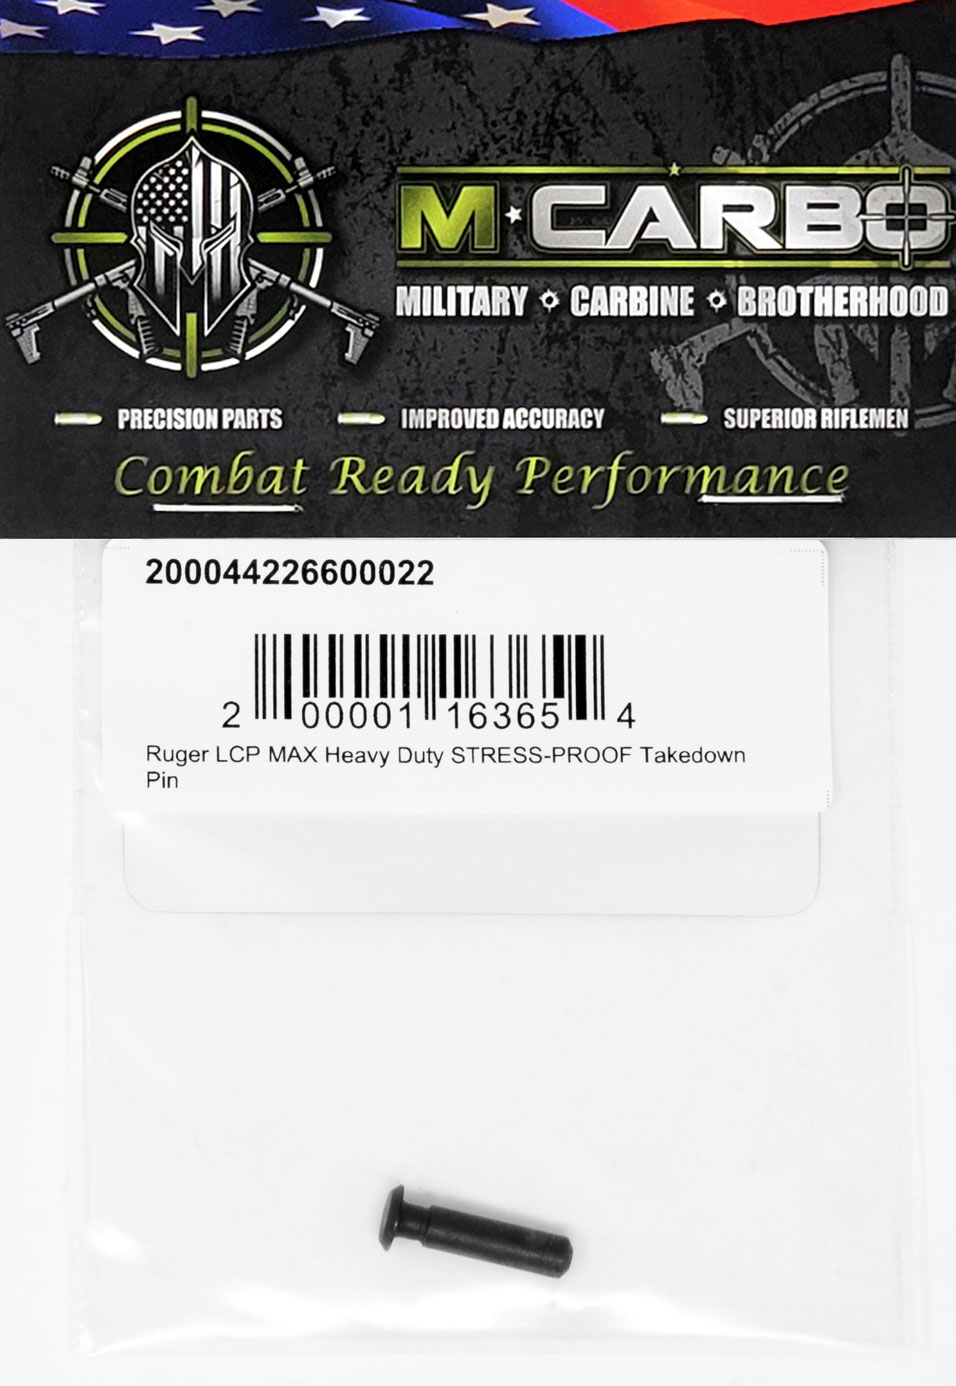 Packaged Ruger LCP MAX Heavy Duty STRESS-PROOF Takedown Pin M*CARBO